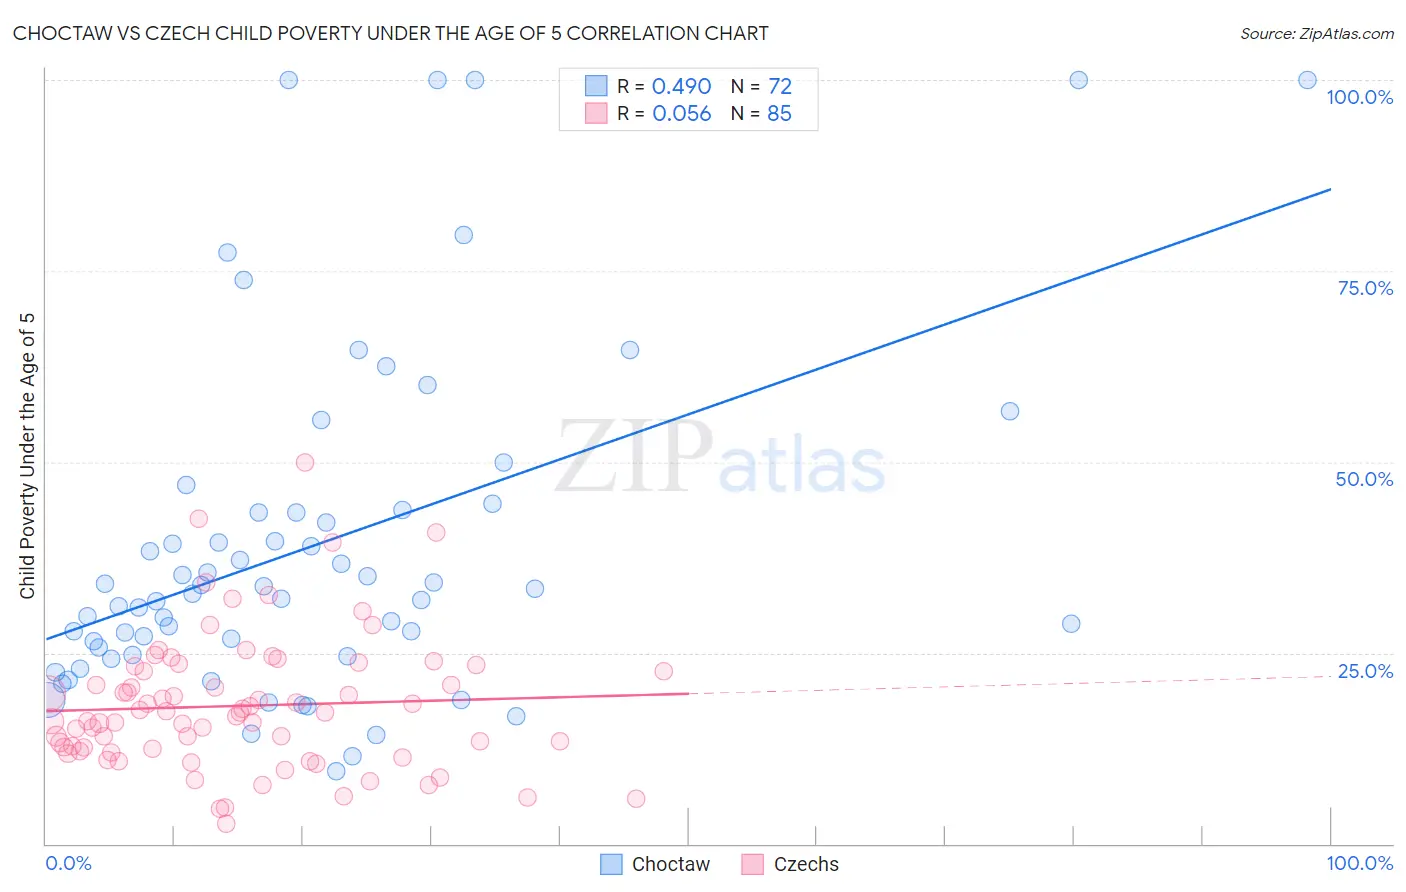 Choctaw vs Czech Child Poverty Under the Age of 5